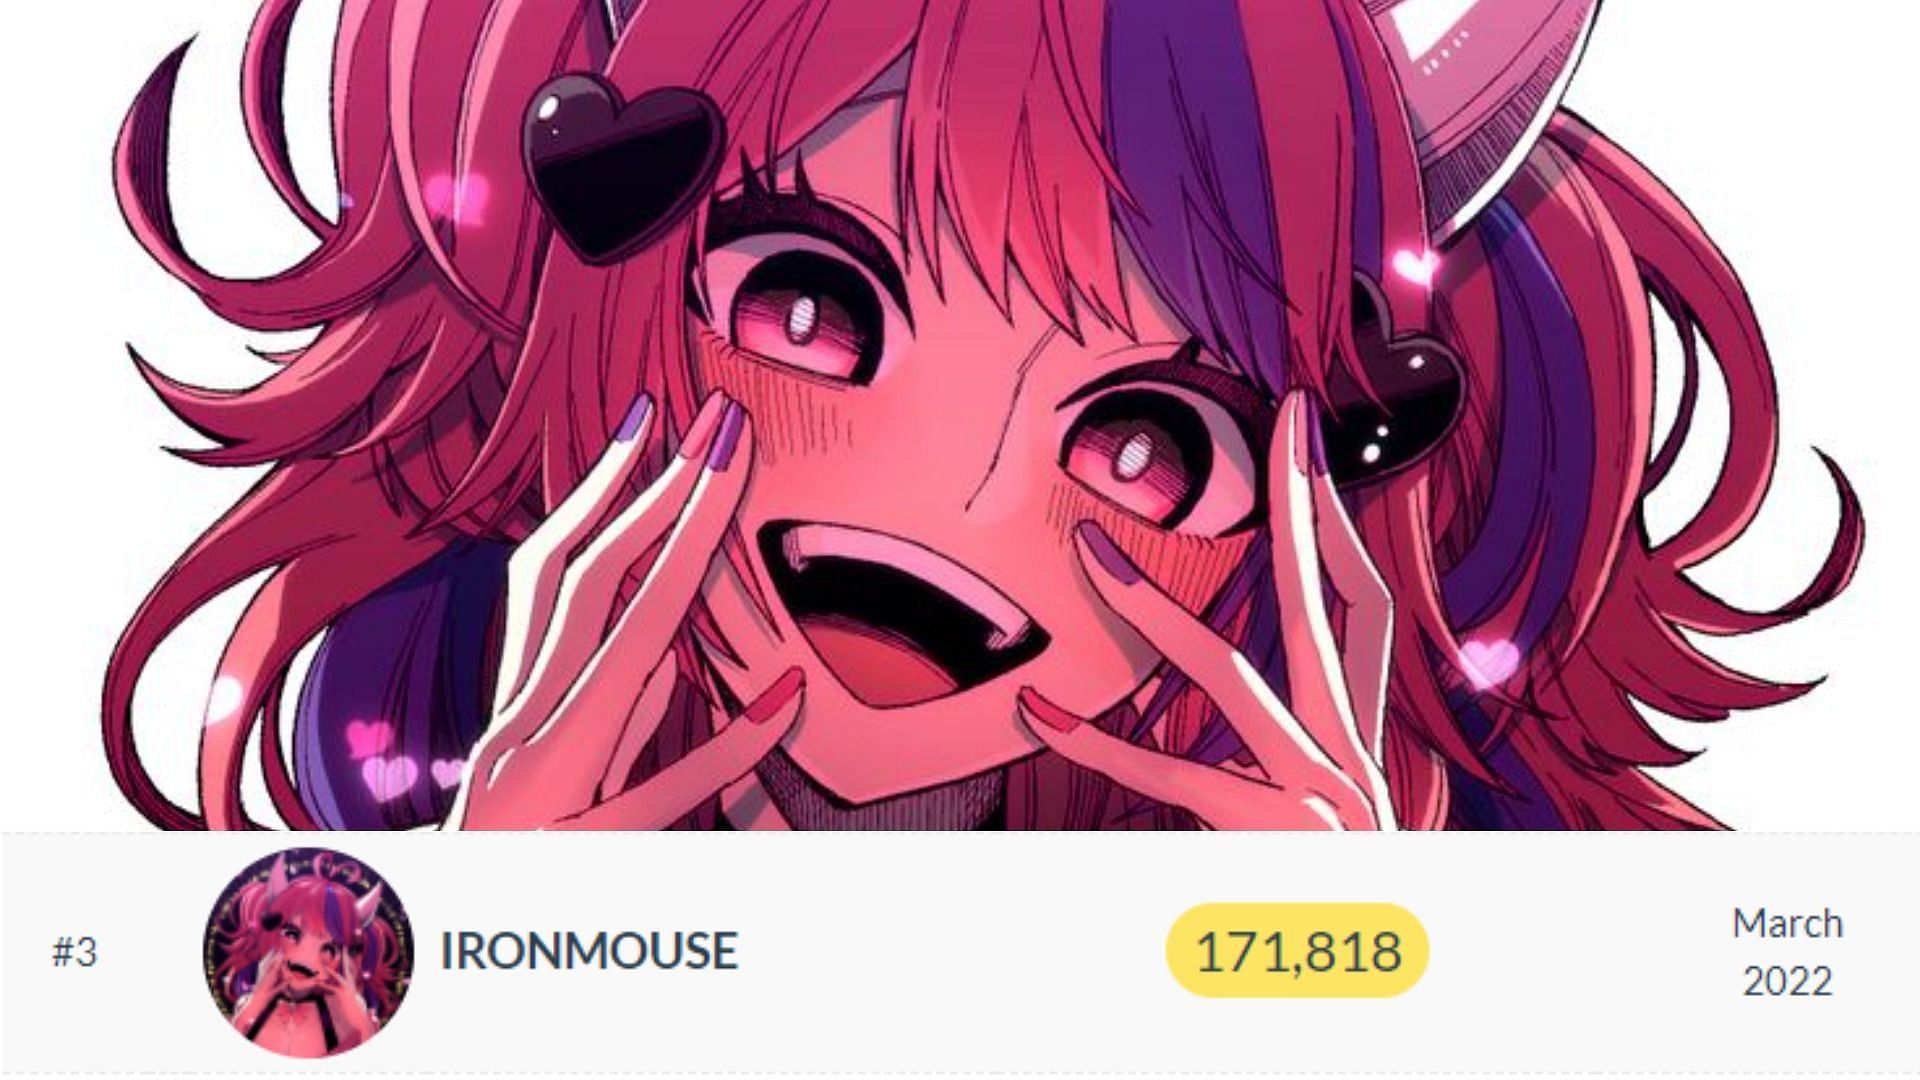 The popular VTuber Ironmouse has become the most subbed-to female streamer on Twitch (Image via Sportskeeda)